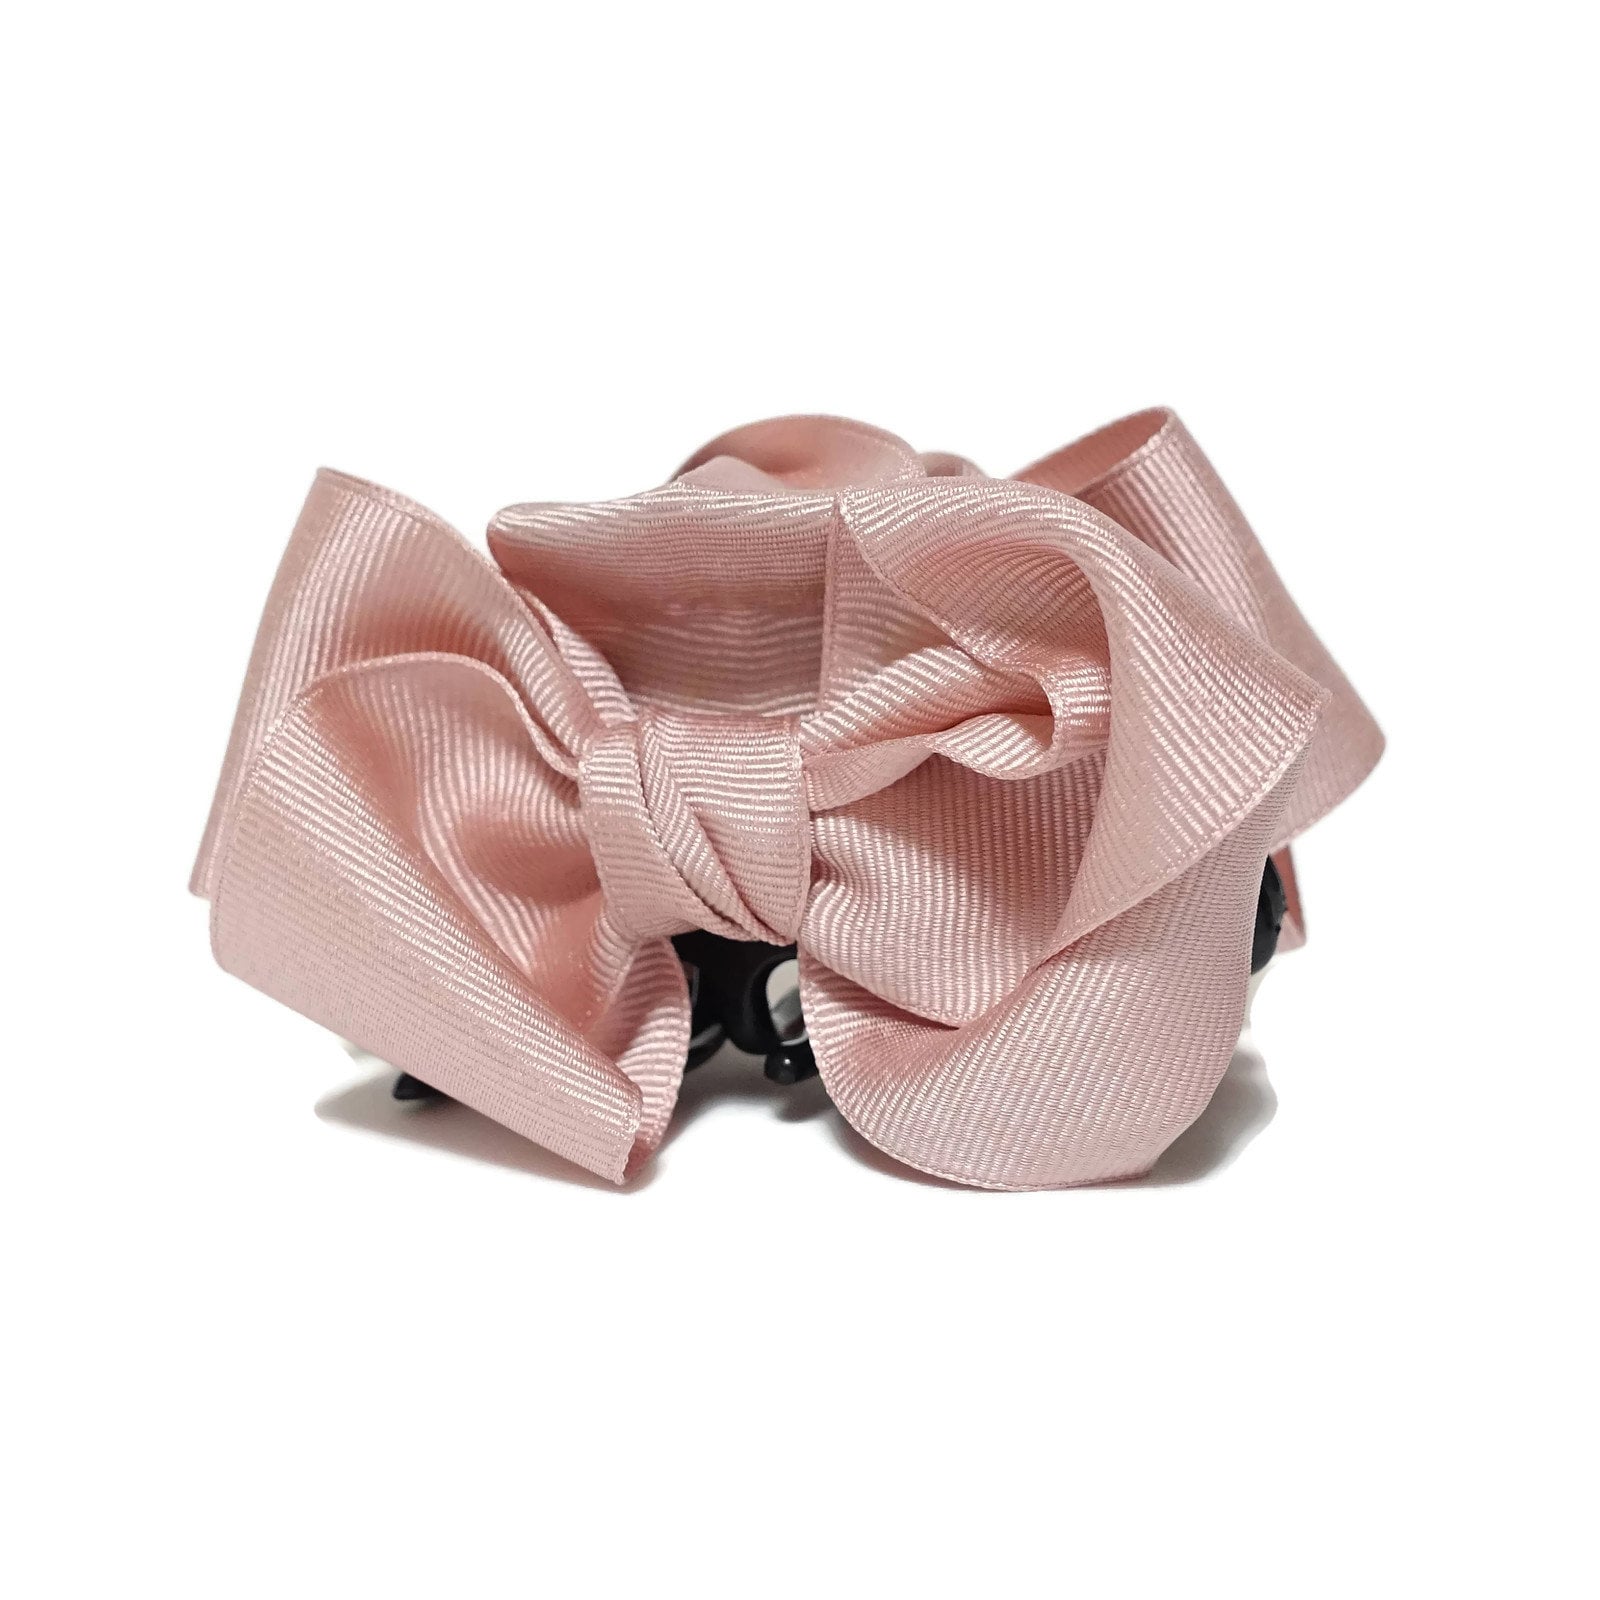 VeryShine claw/banana/barrette Pink Handmade Grosgrain bow hair claw clip Fabric Bow Butterfly Wing Hair Jaw Claw Clip Women Hair Accessory